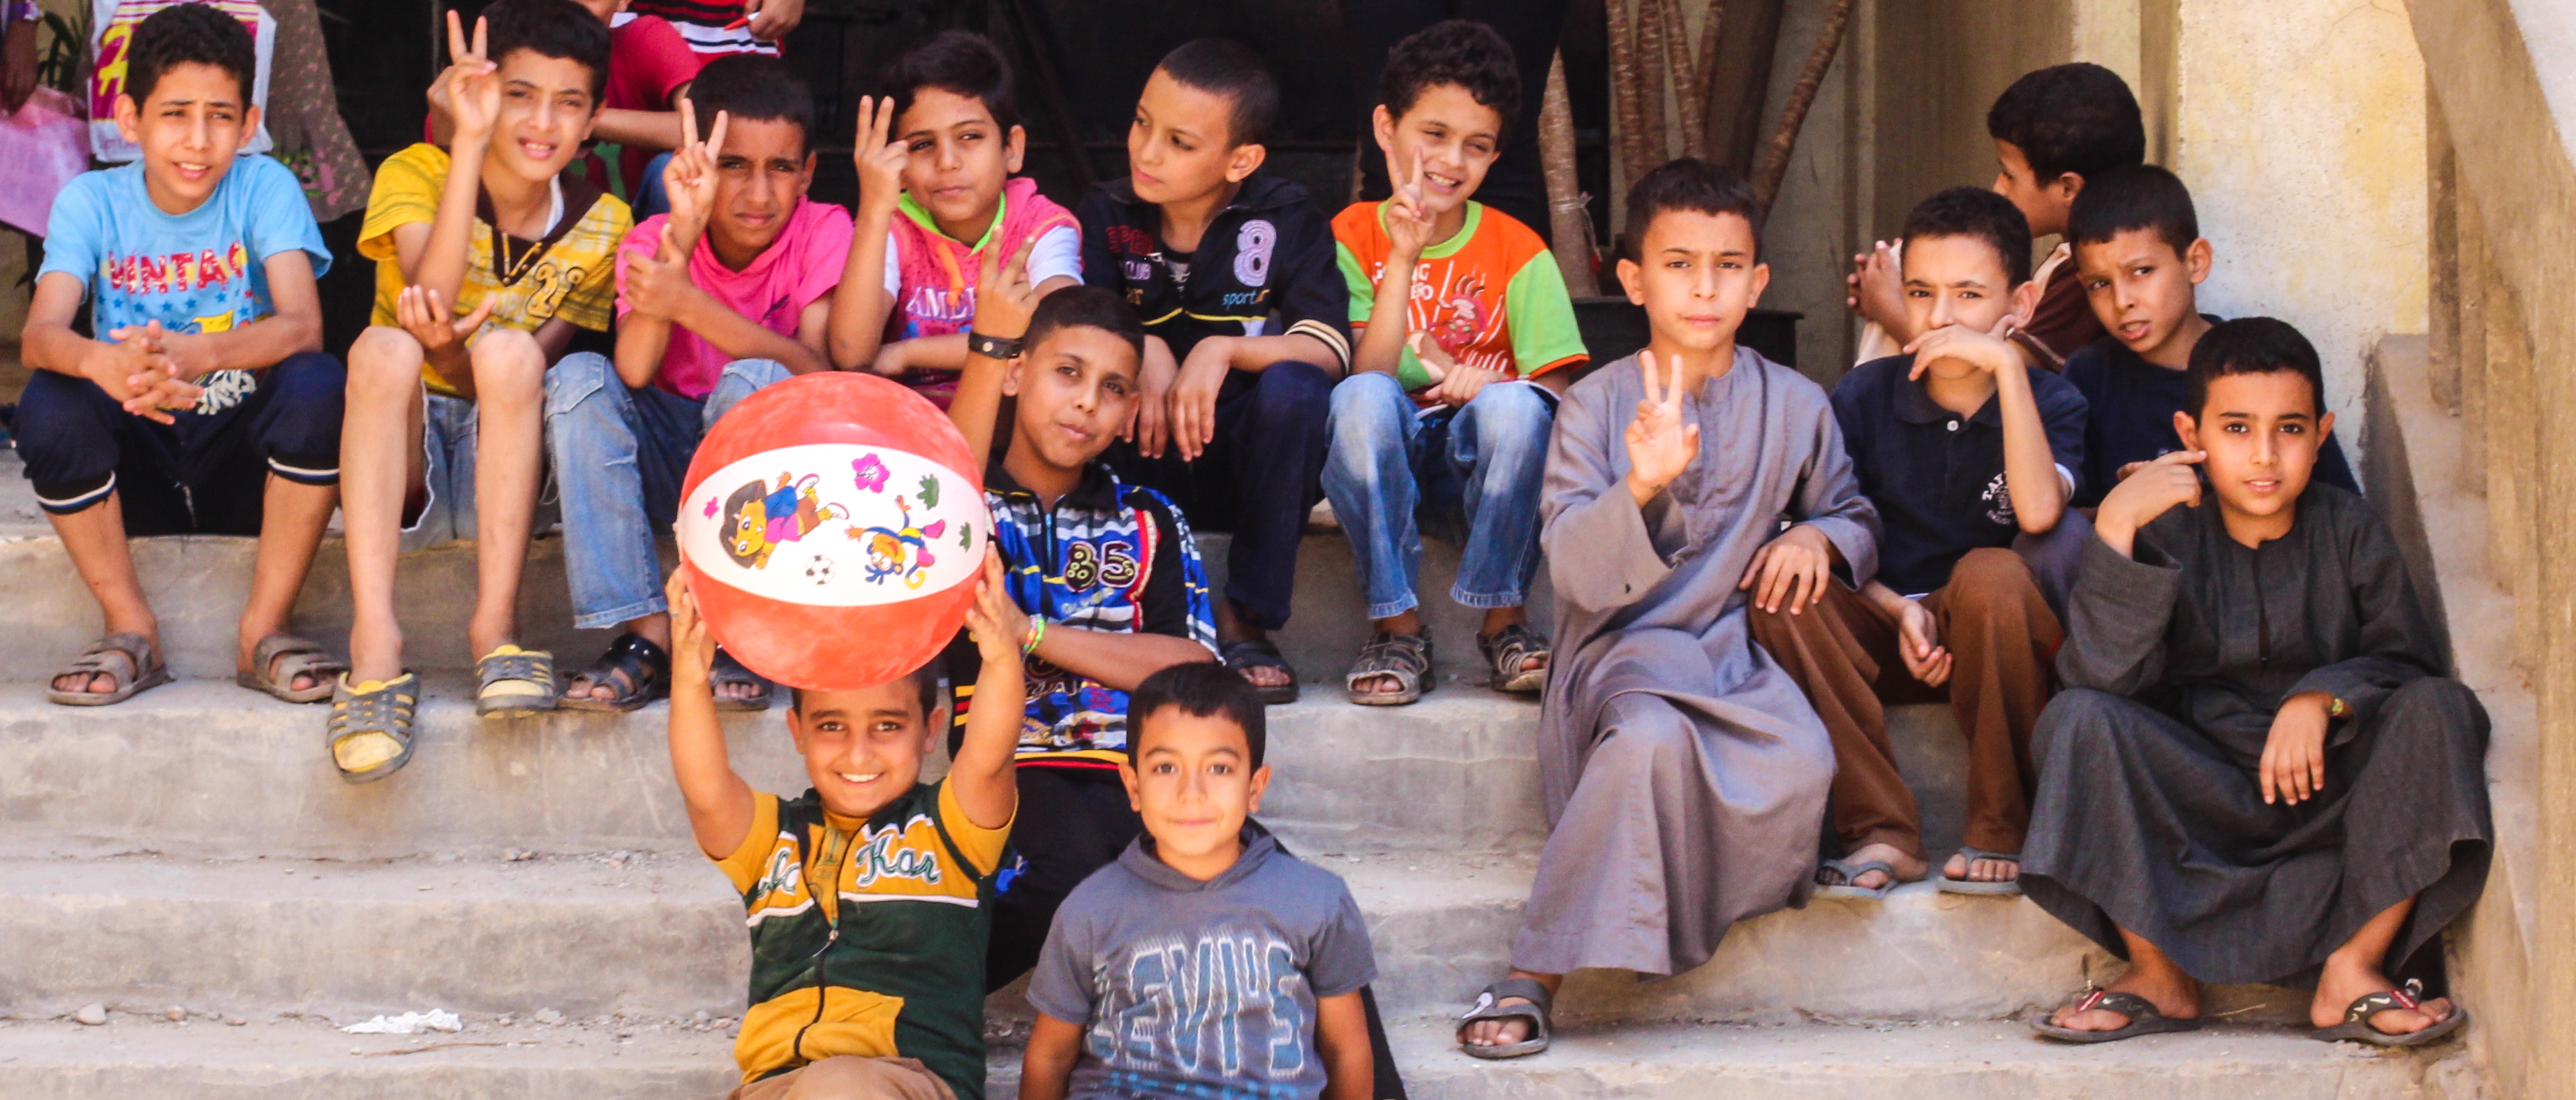 SIMPLY BY SHOPPING AT AMAZON, YOU CAN HELP EGYPT’S CHILDREN DURING THE COVID-19 CRISIS